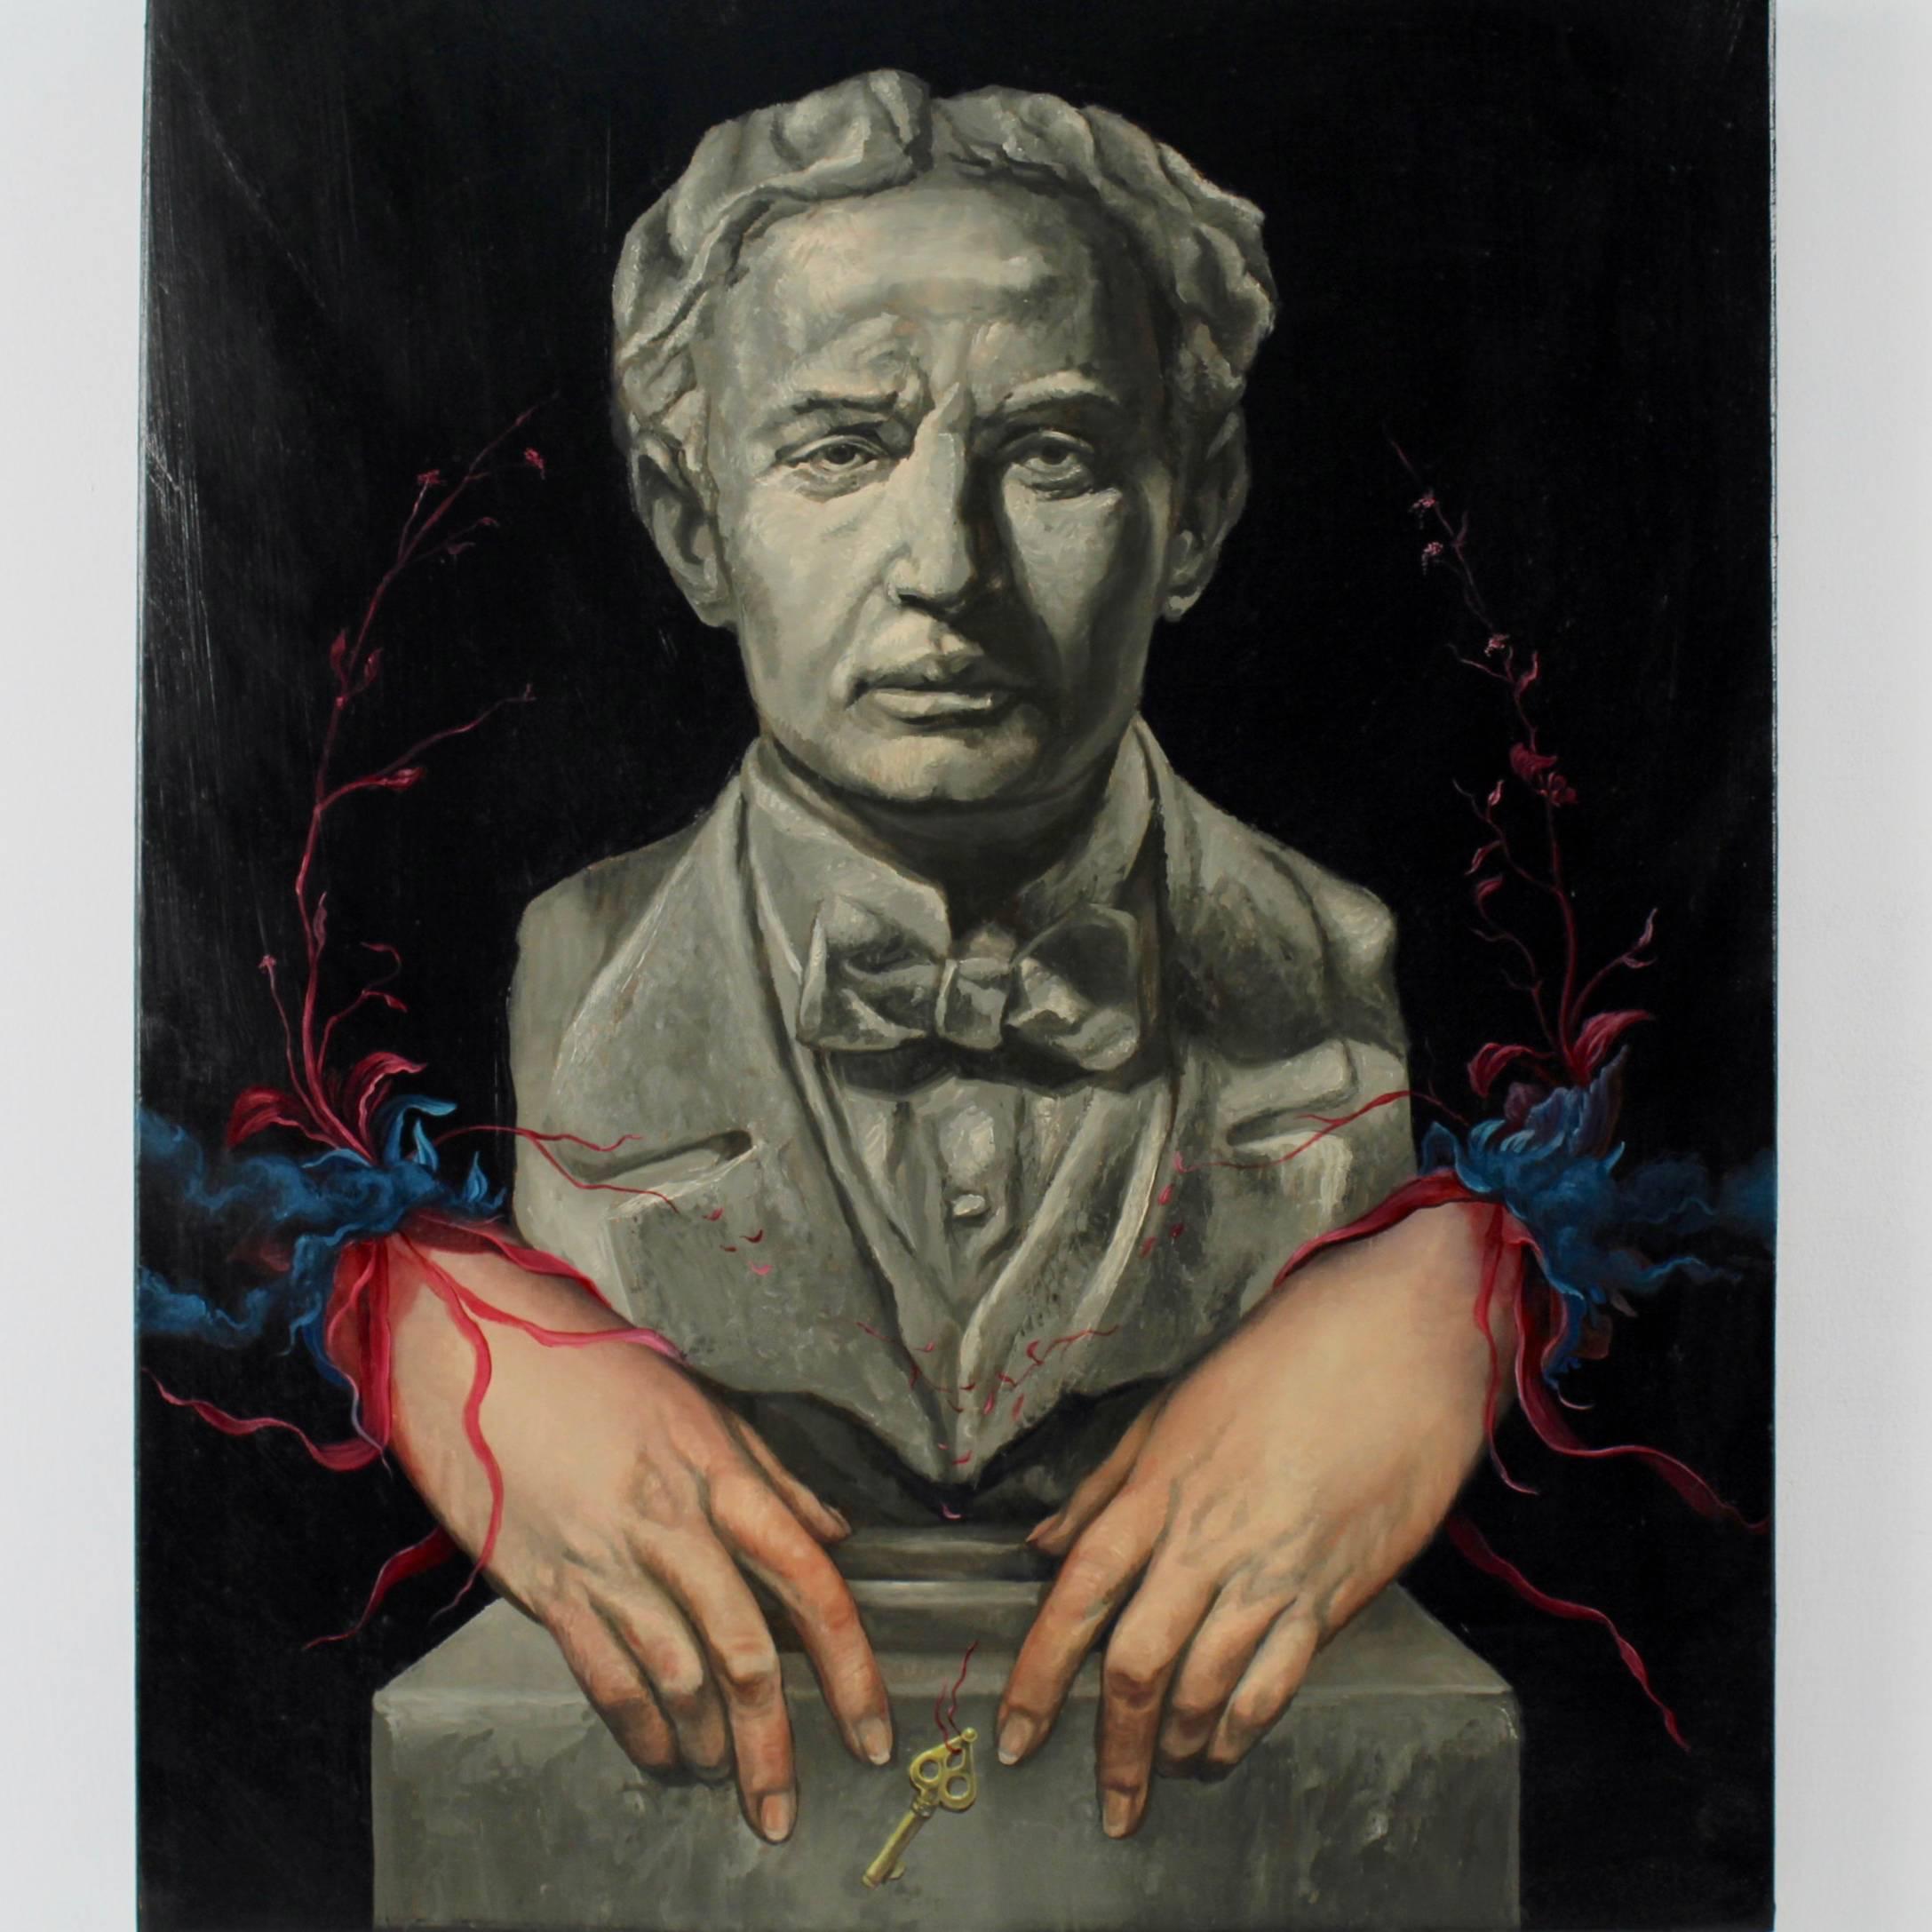 Boundless.

Depicts liminial hands and a key before the only remaining Bust of Houdini.

Oil on panel by Paul Romano.

Size: circa 20 in. by 24 in. 

Items purchased from David Sterner antiques must delight you. Purchases may be returned for